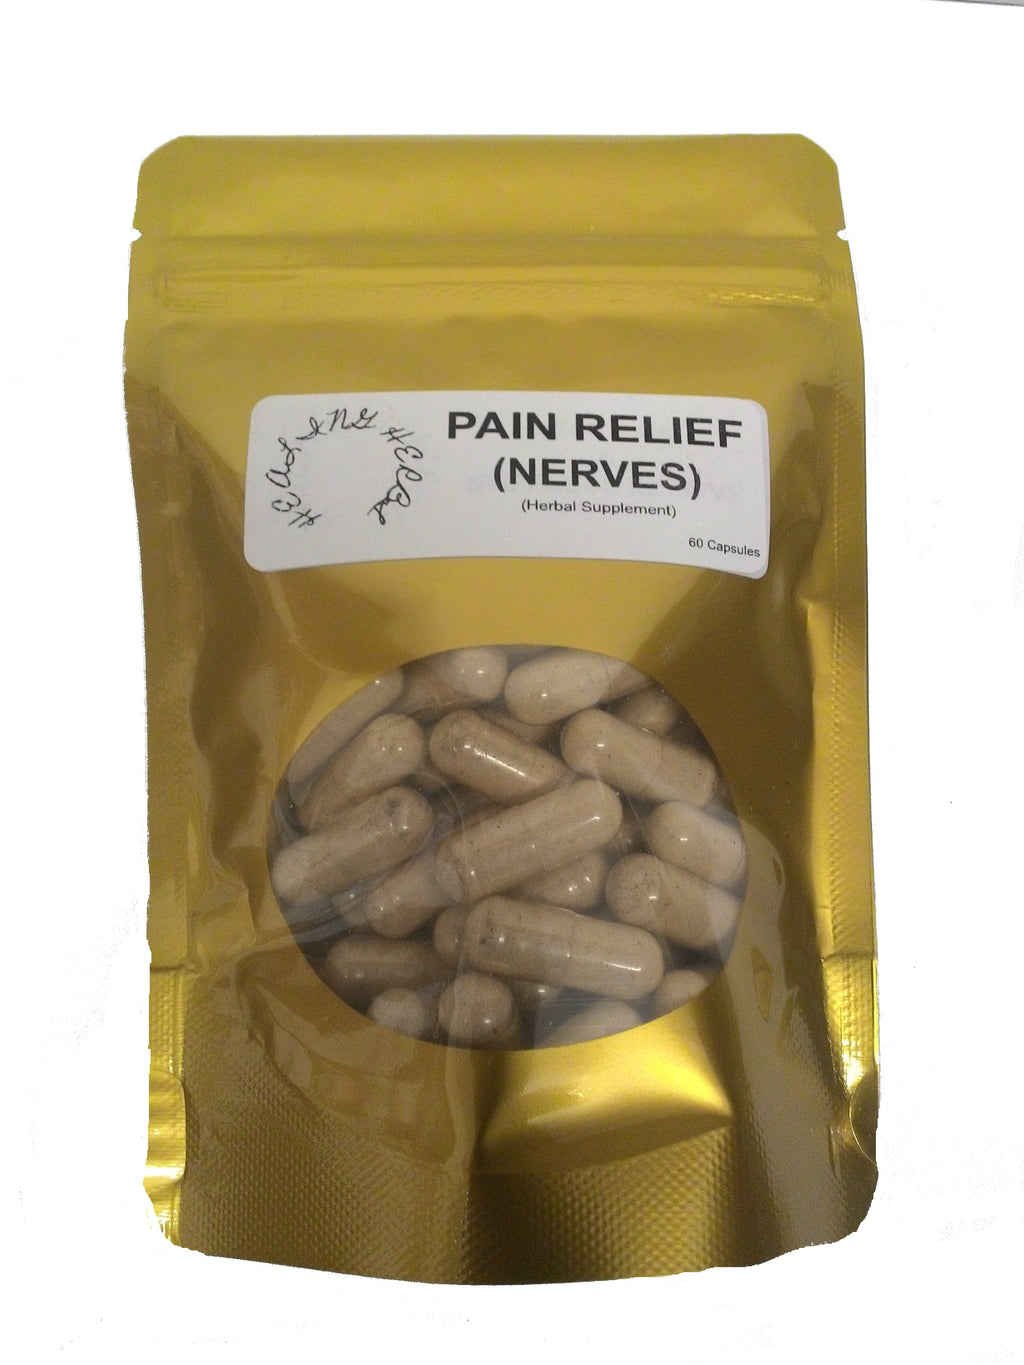 this is the front image of "PAIN RELIEF NERVES" helps all kinds of nerve pain